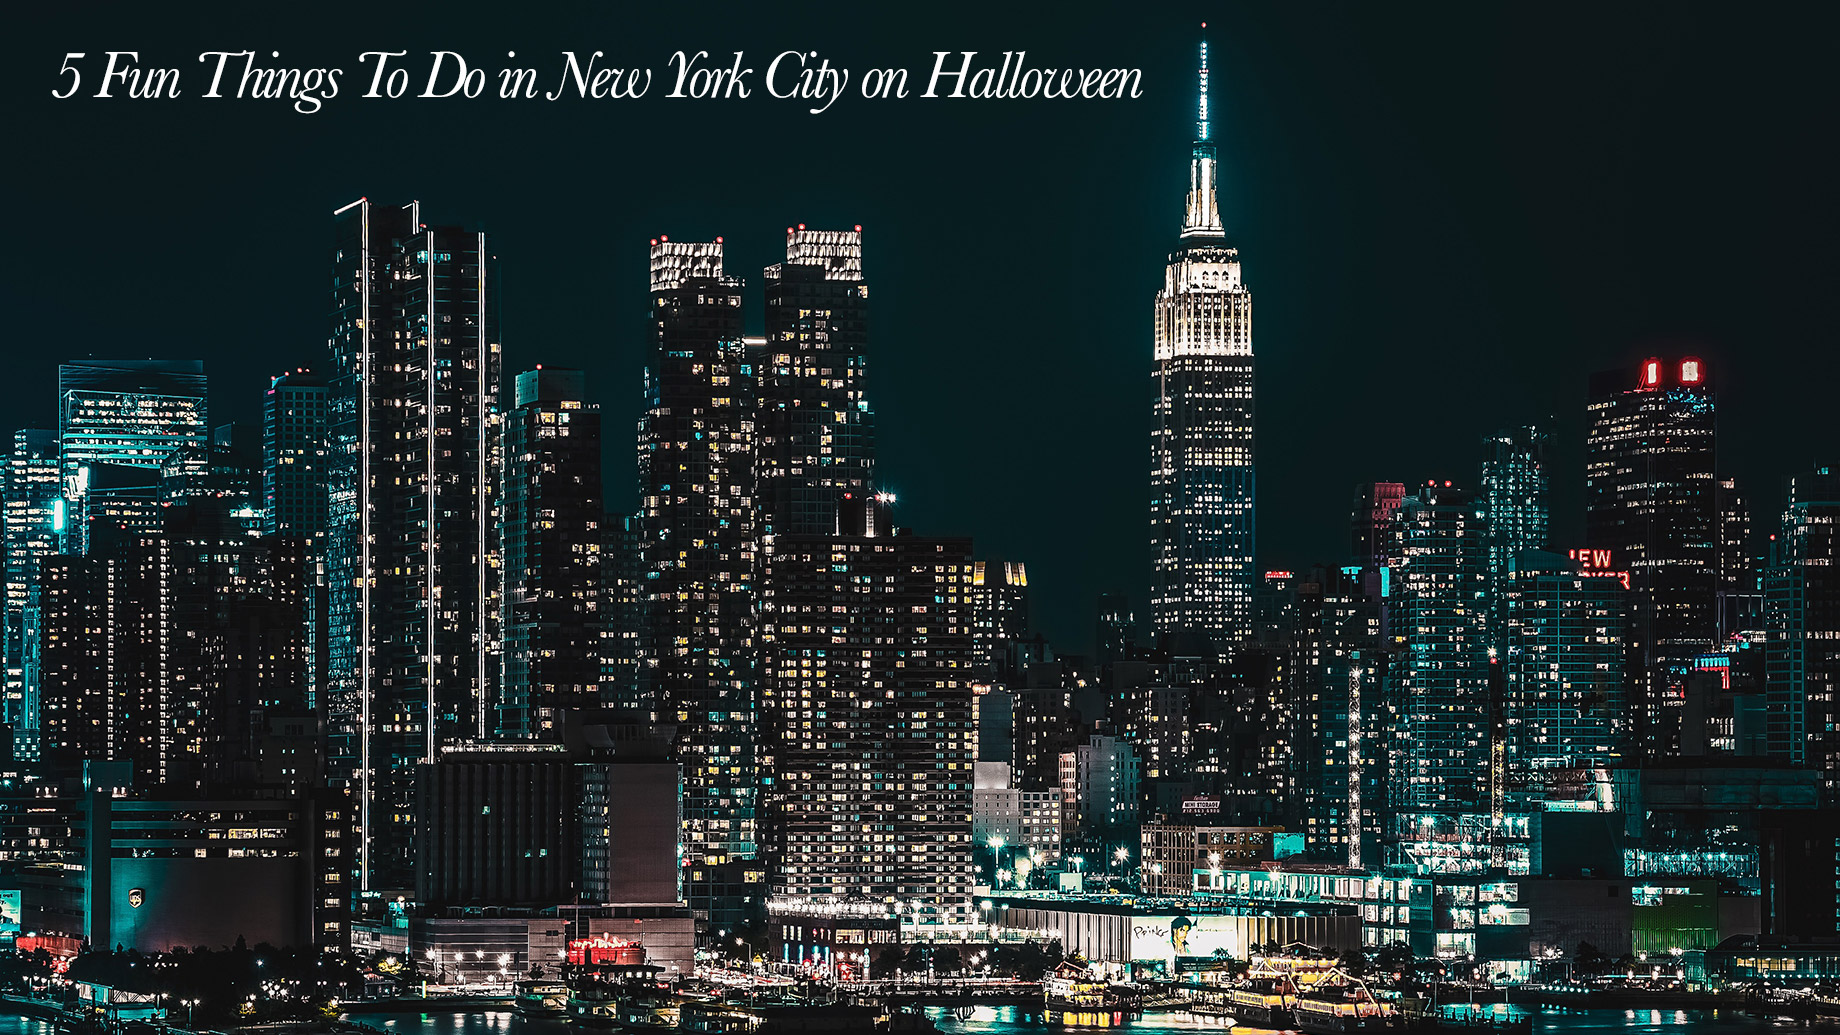 5 Fun Things To Do in New York City on Halloween